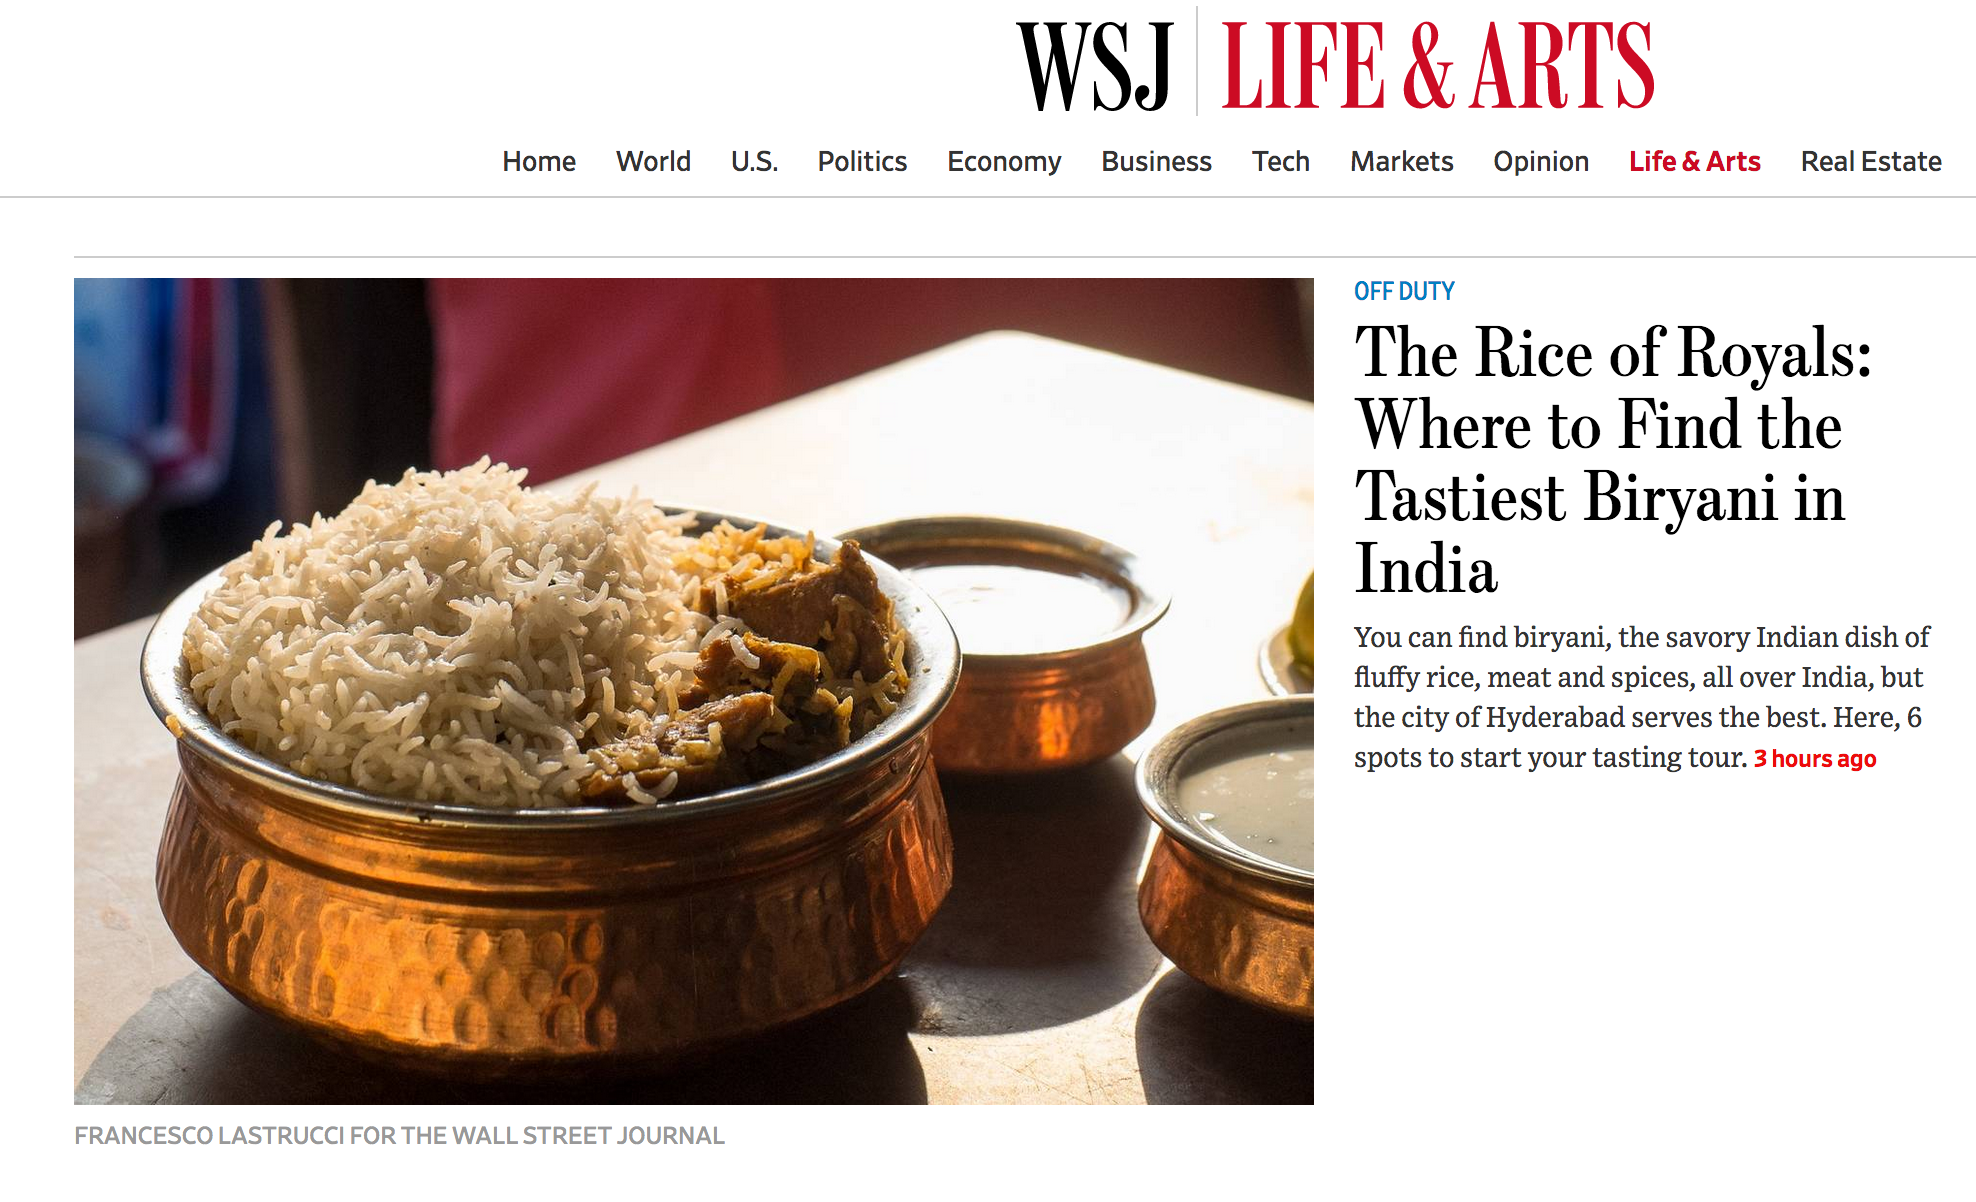 Wall Street Journal: The Rice of Royals – Where to Find the Tastiest Biryani in India